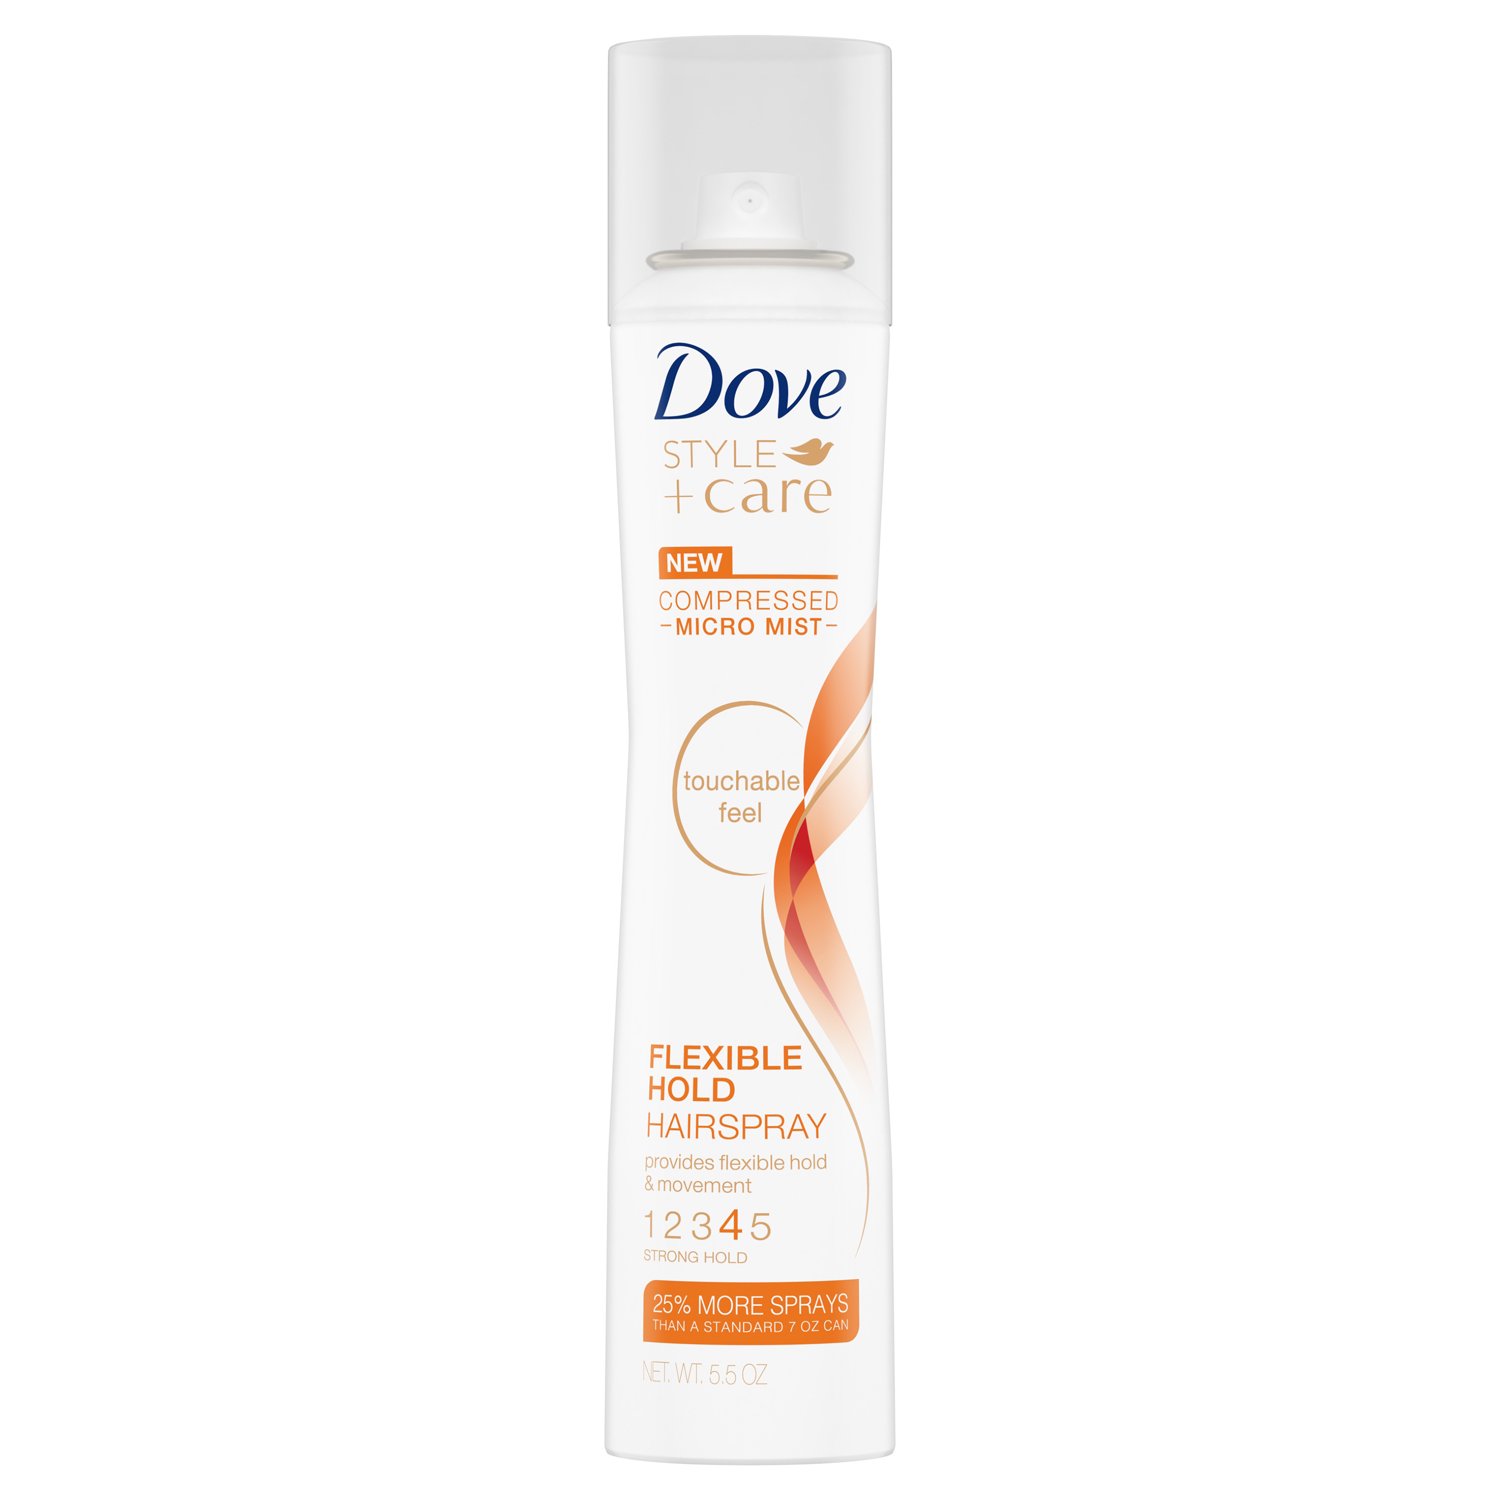 Dove Style+Care Compressed Micro Mist hairspray, 5.5 oz - image 1 of 8